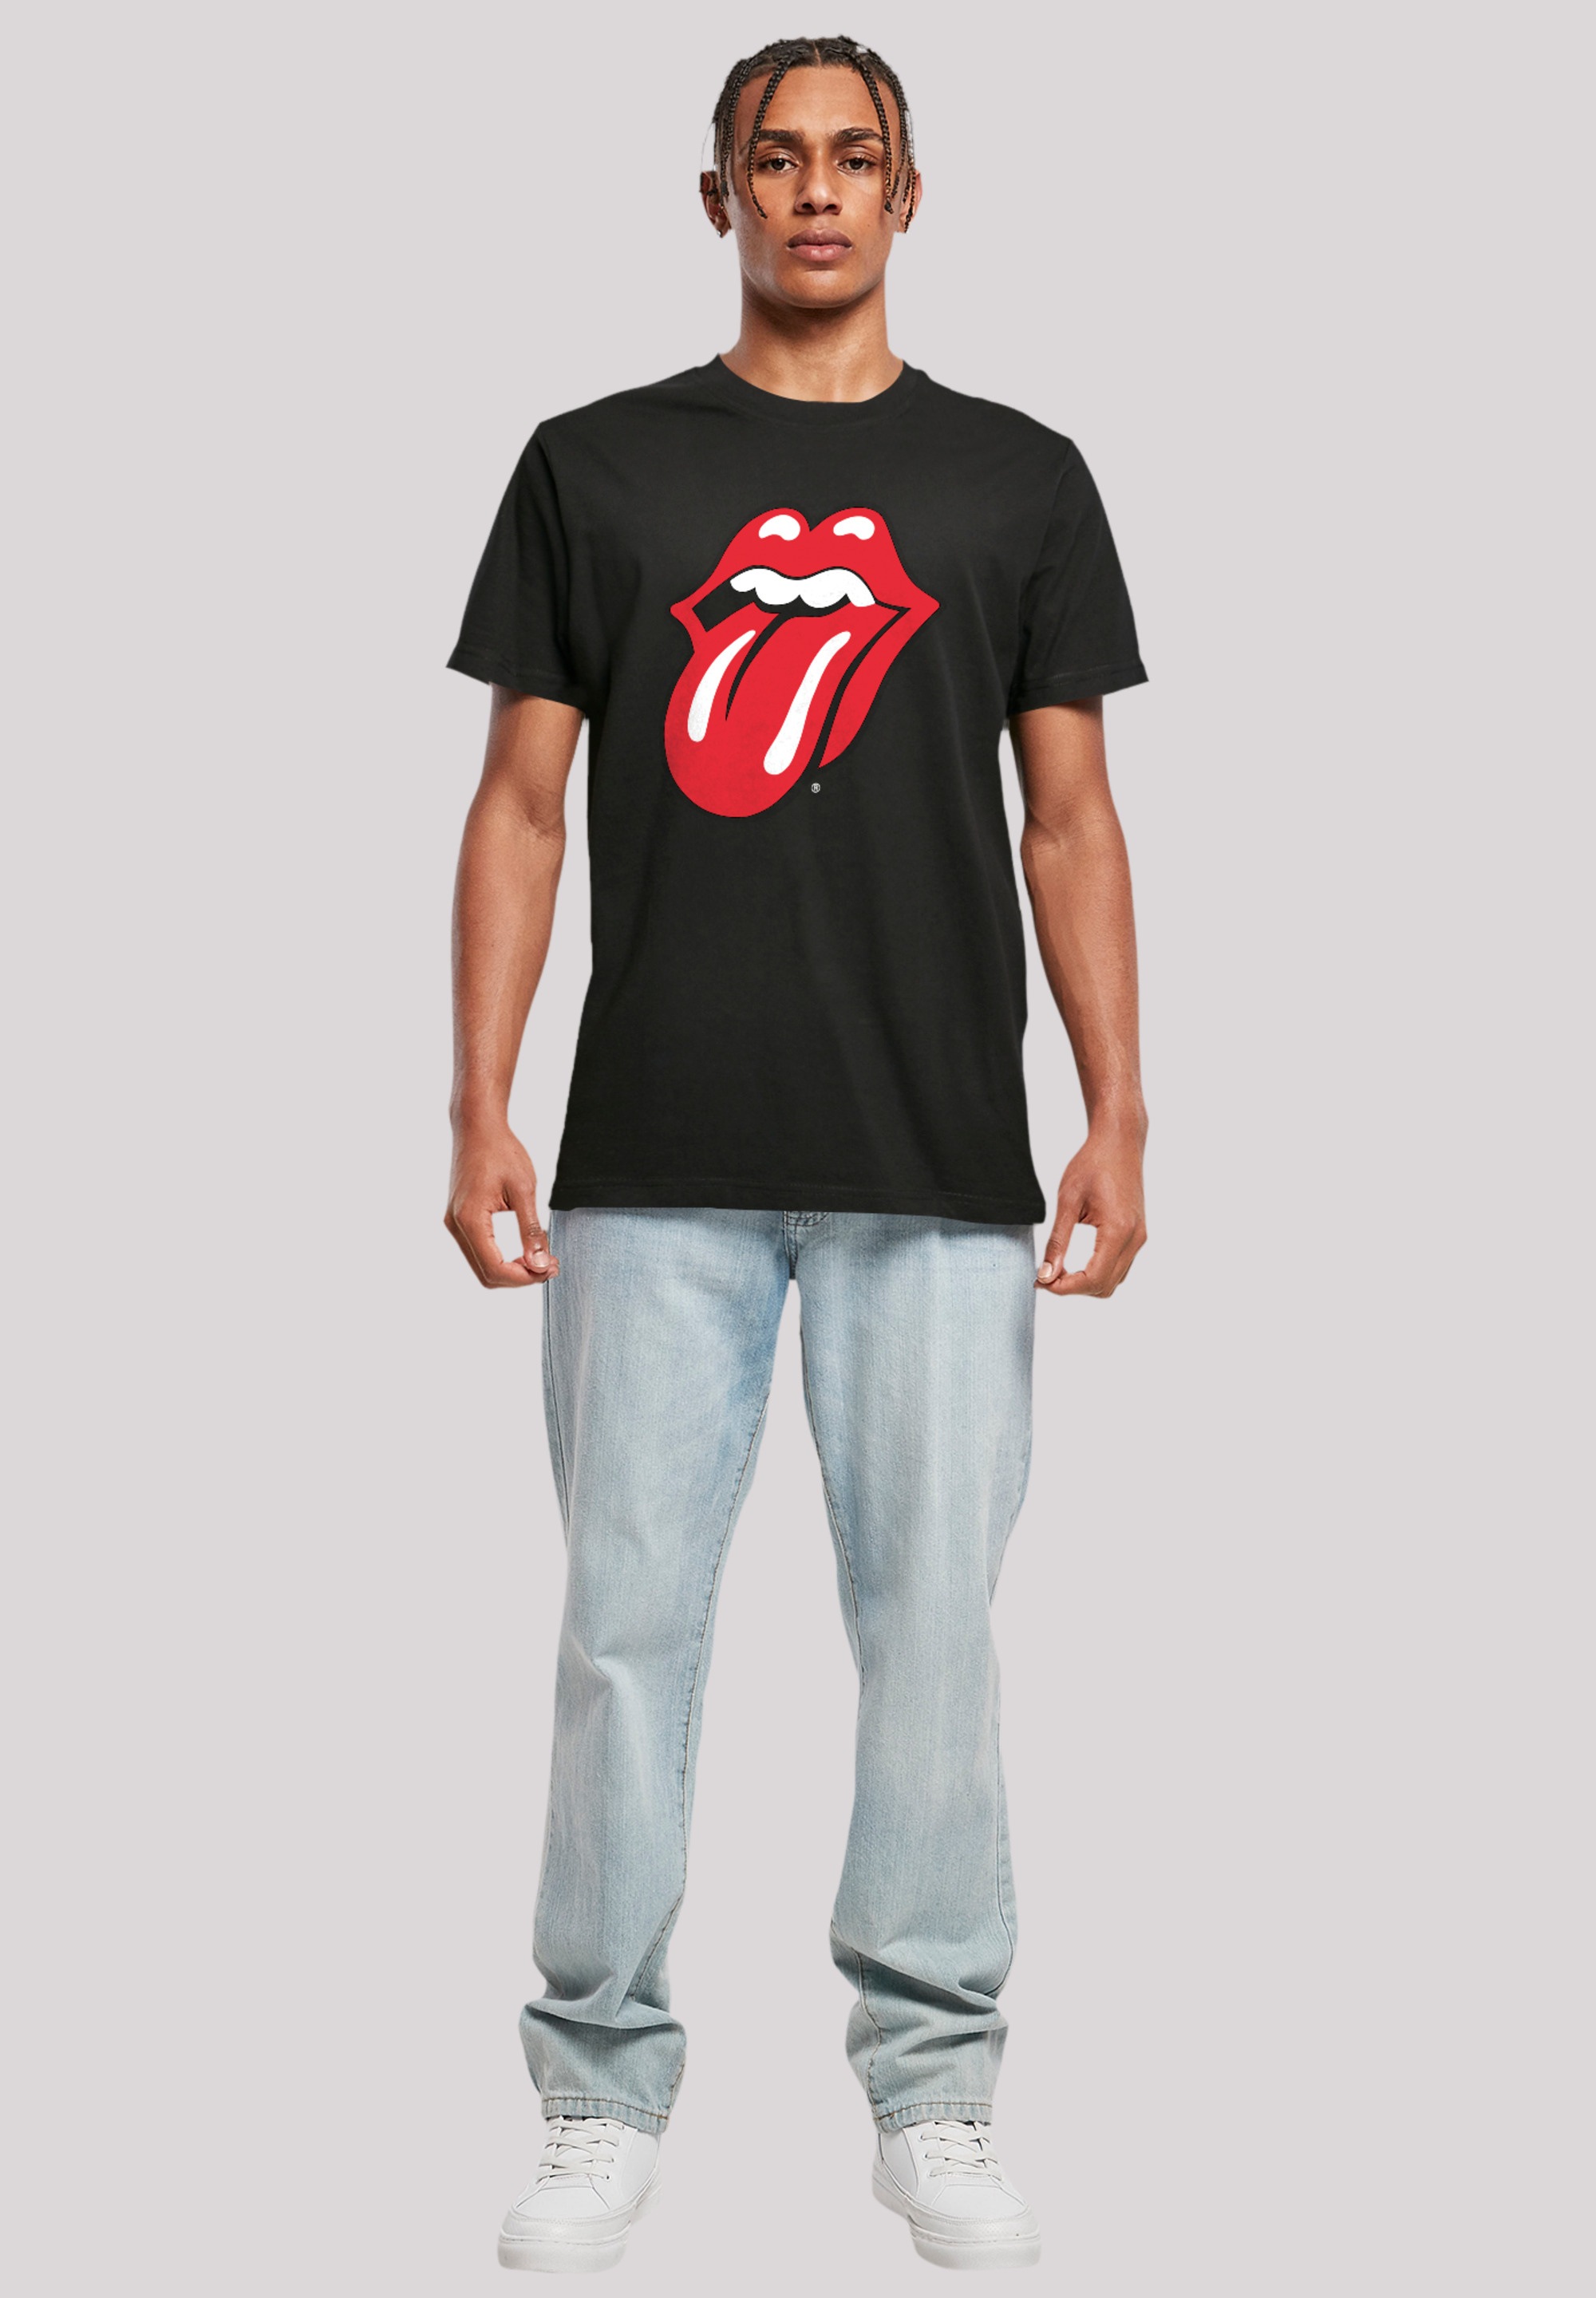 ▷ Rolling Print BAUR Rote T-Shirt »The | Stones kaufen Zunge«, F4NT4STIC